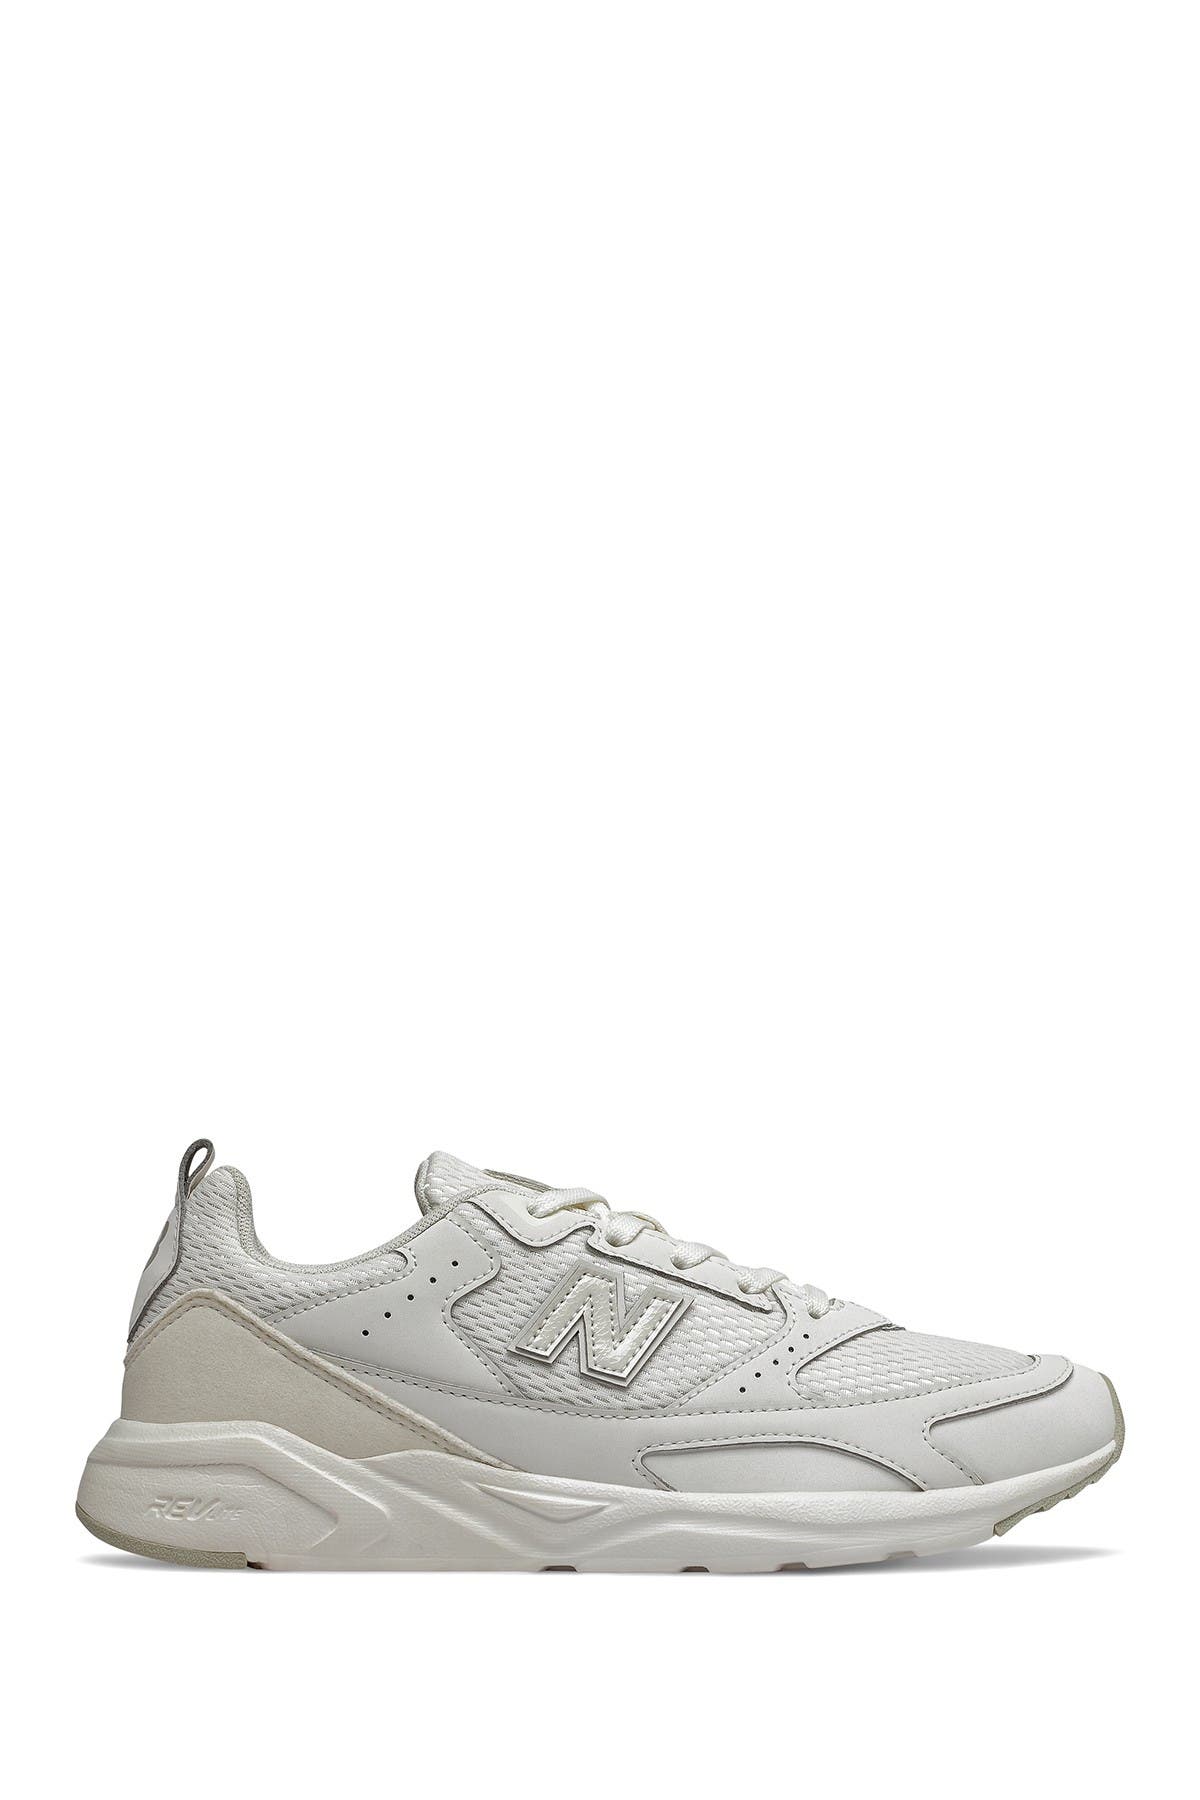 nordstrom new balance shoes